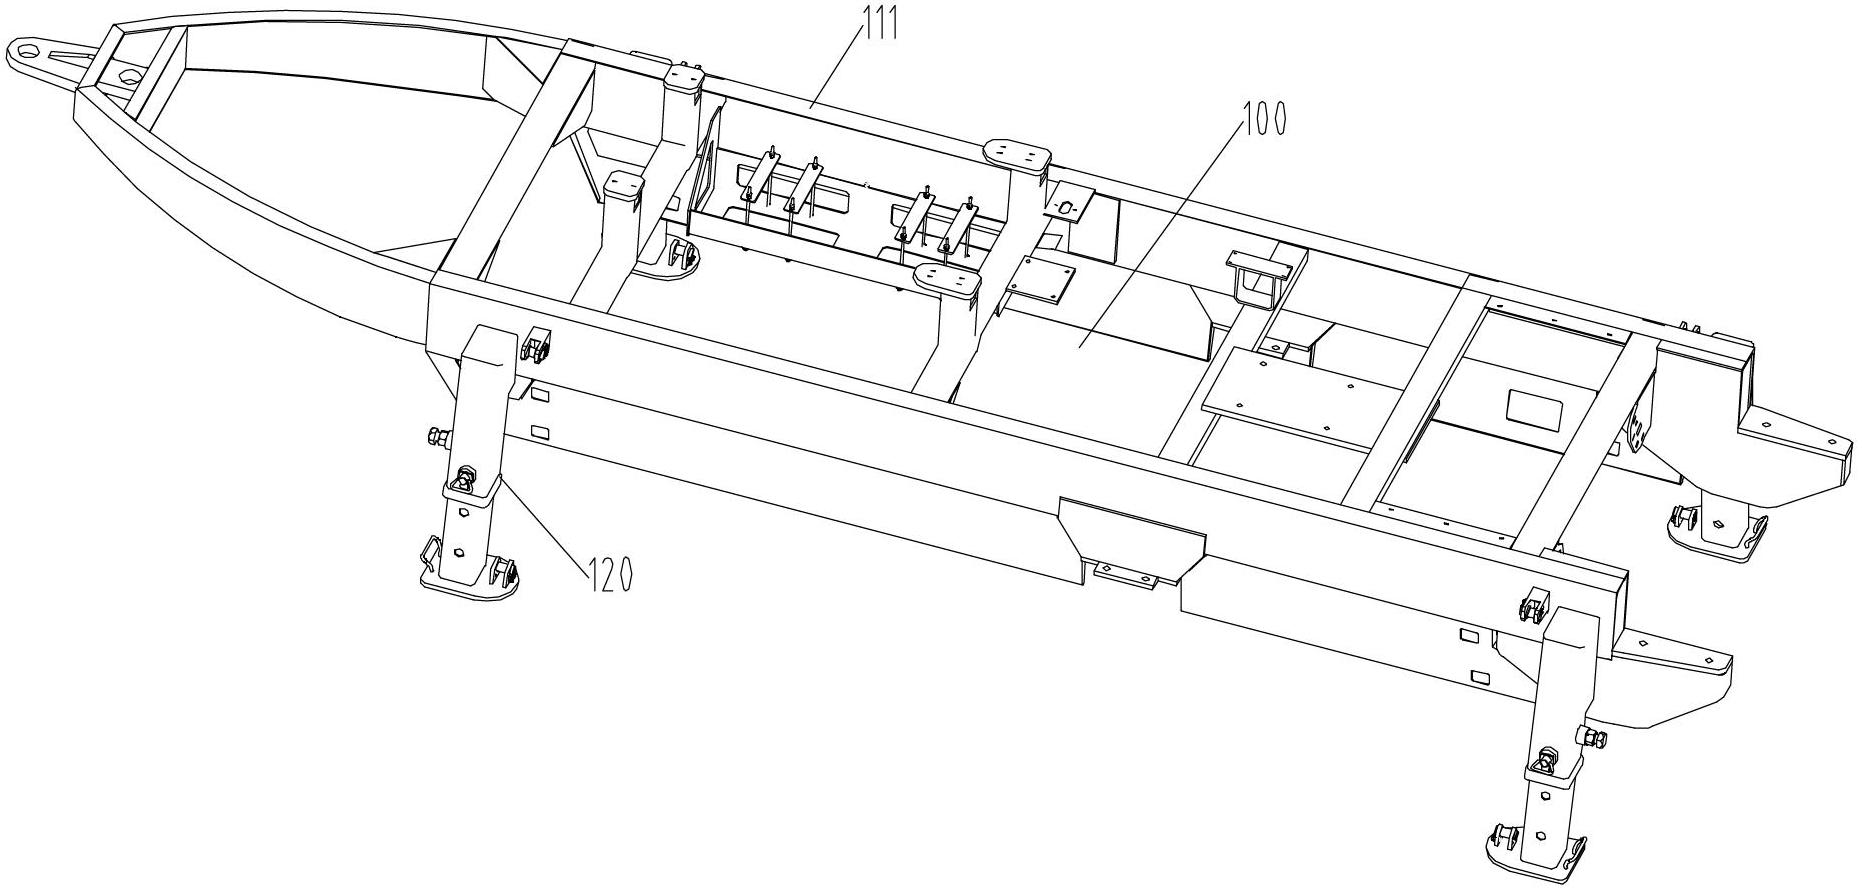 Concrete pumping equipment and frame thereof